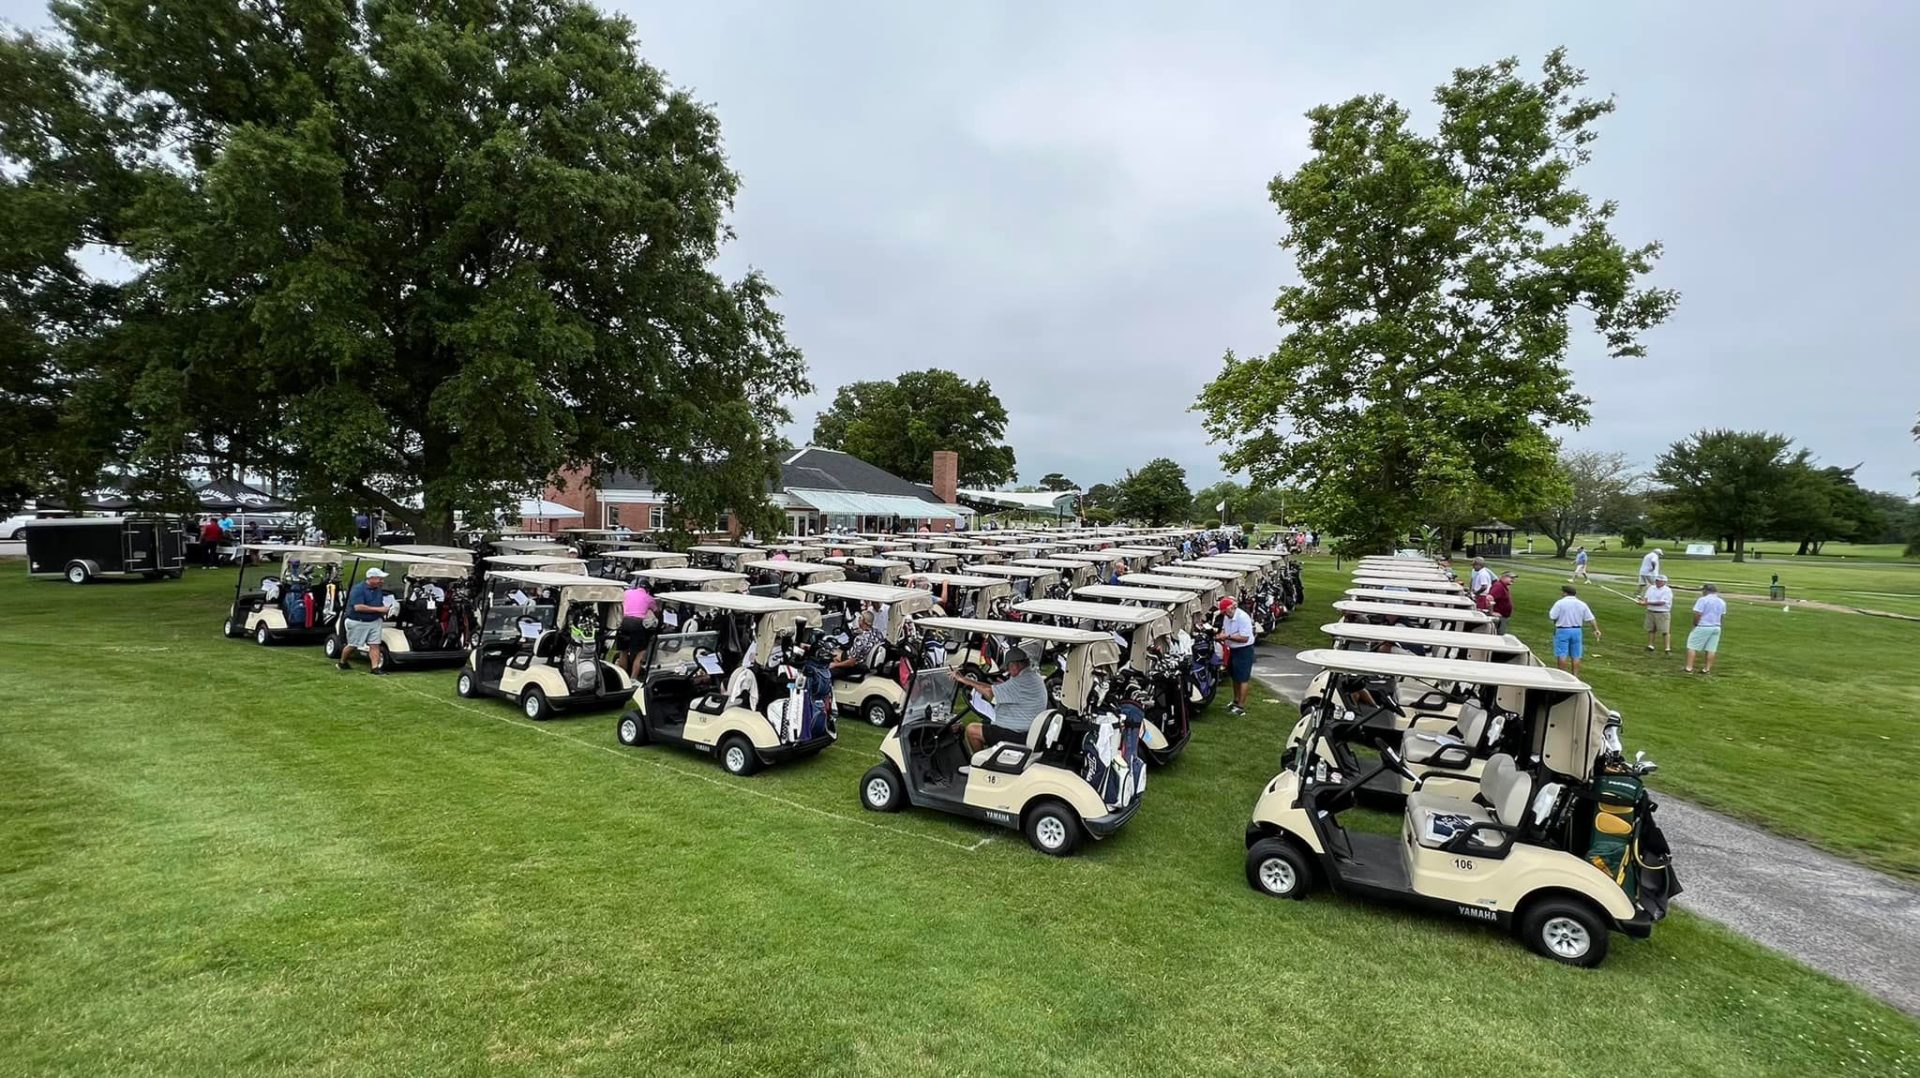 Golf carts lined up prepared for an outing